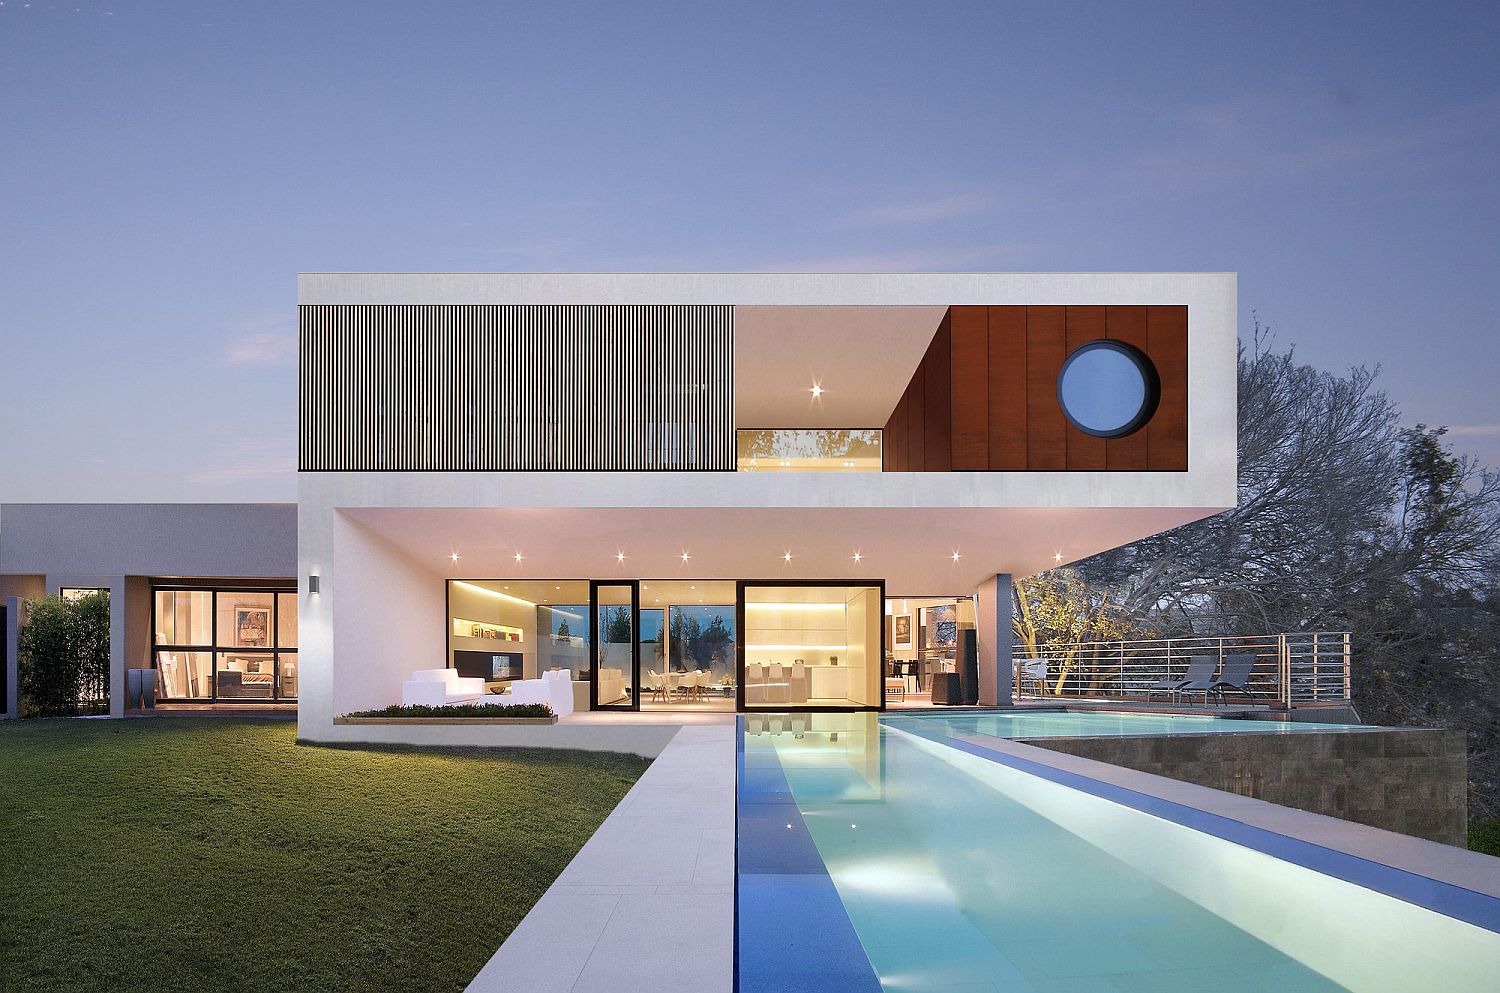 25-meter infinity lap pool of the house is an undoubted showstopper